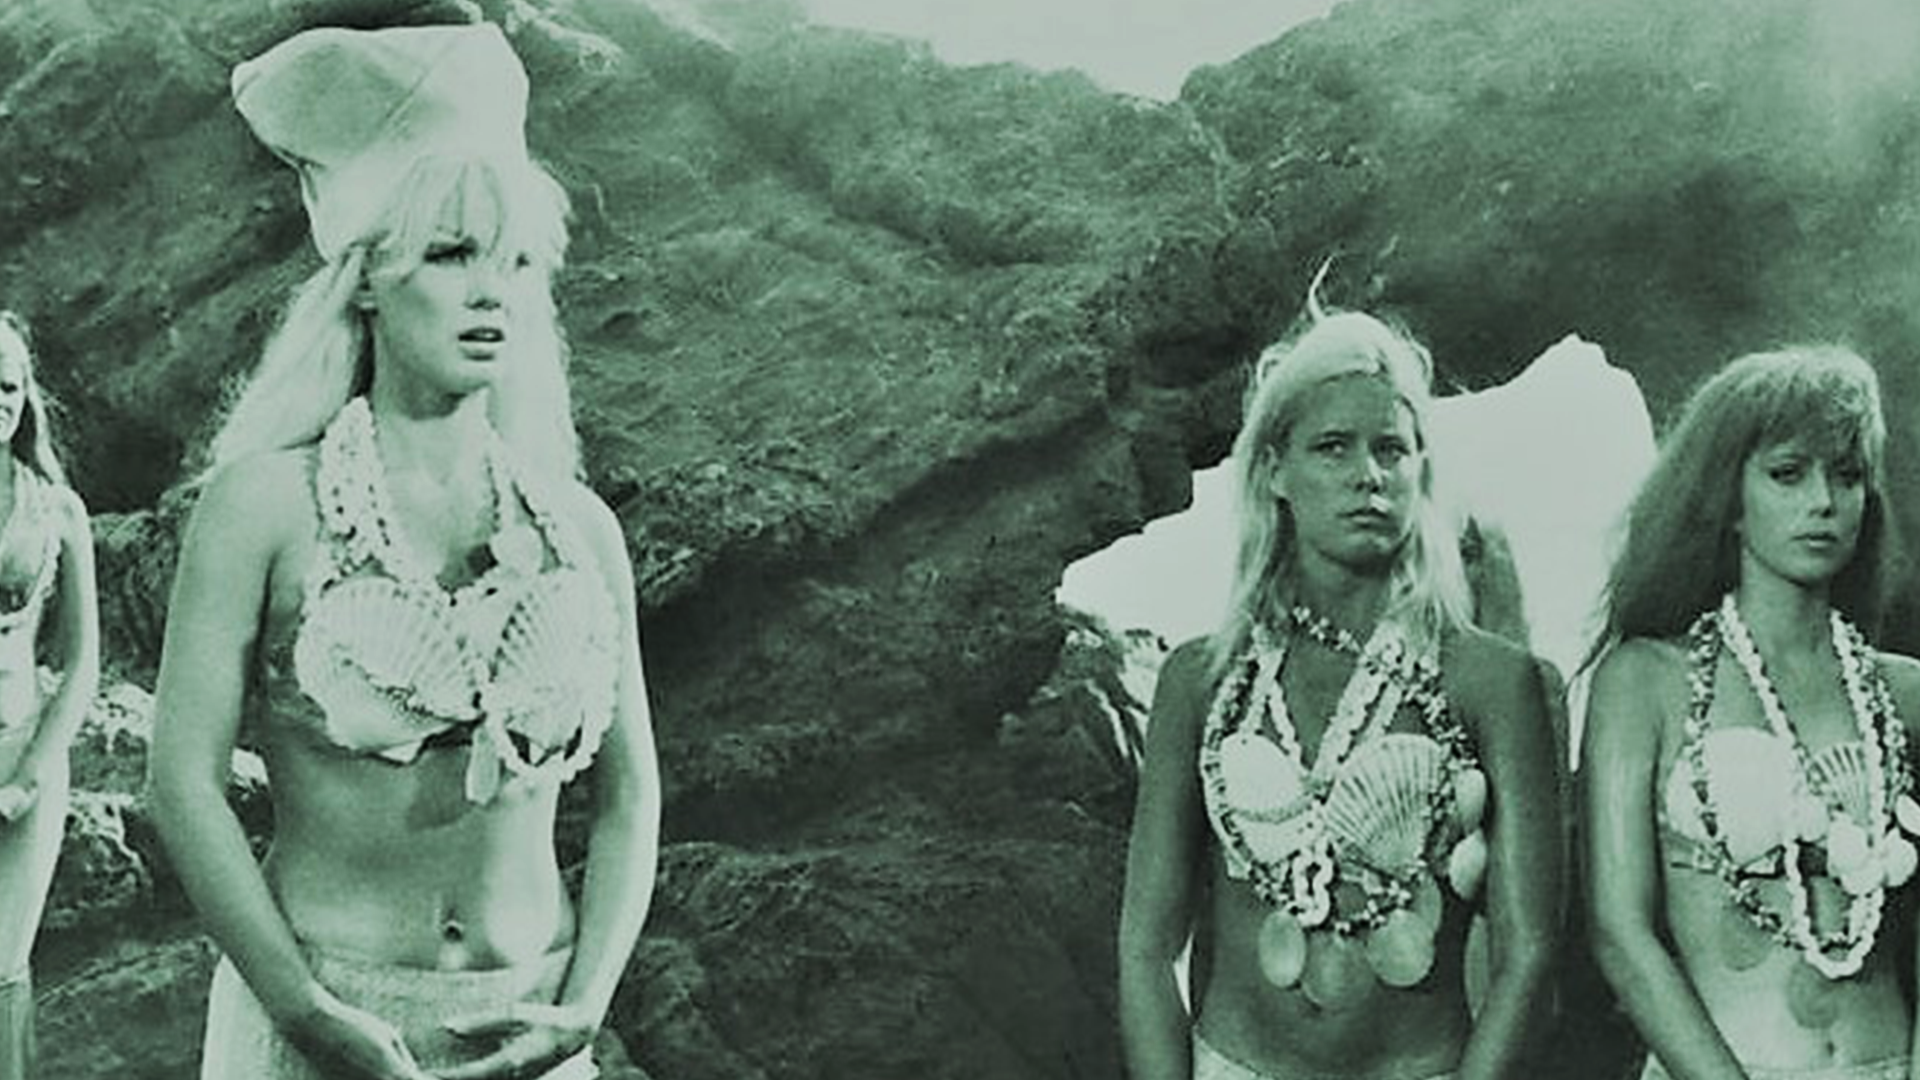 Double Doses of Sci-Fi: Venus Babes & Future Worlds!